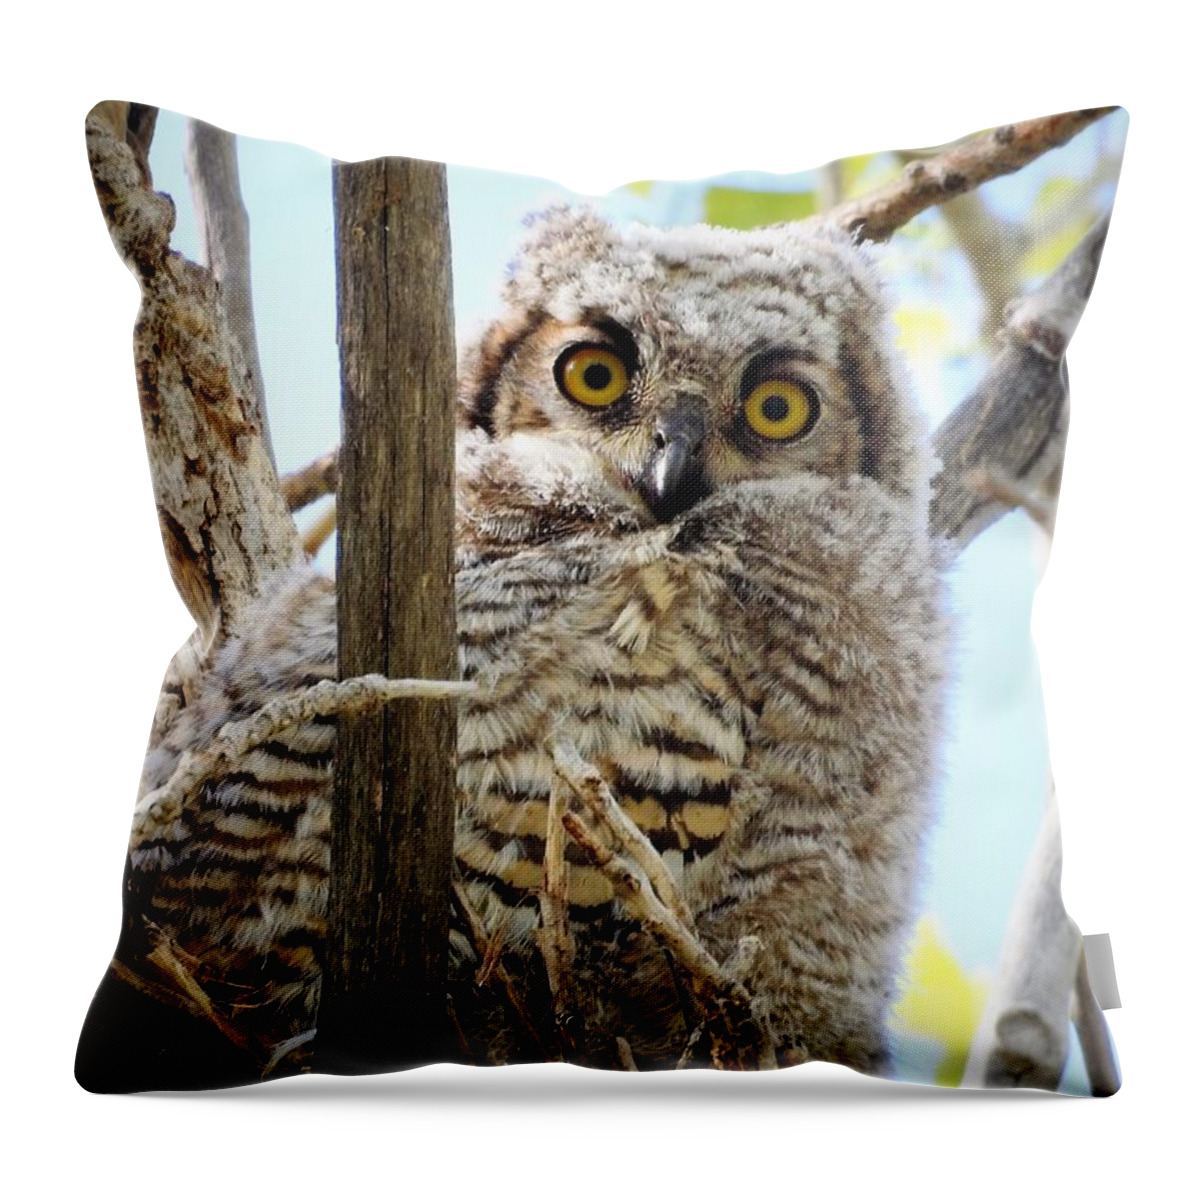 Owl Throw Pillow featuring the photograph Curious by Nicole Belvill